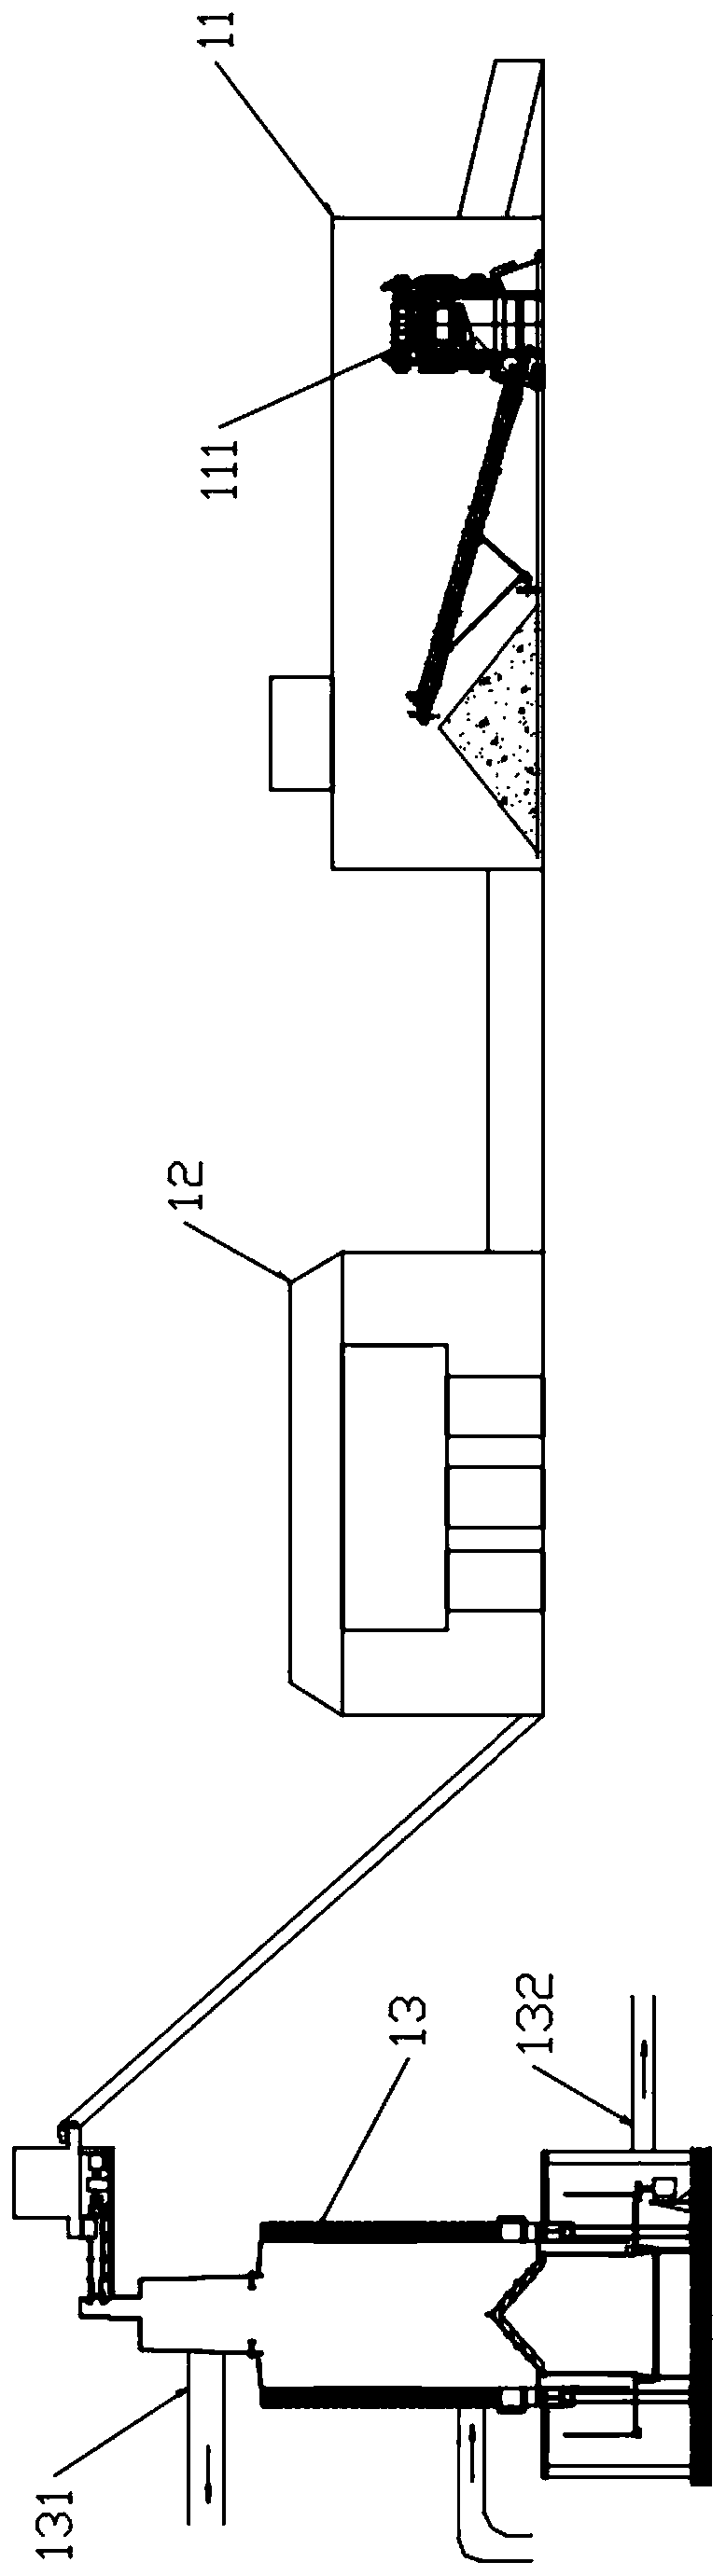 Comprehensive treatment method and treatment system for domestic garbage and sludge